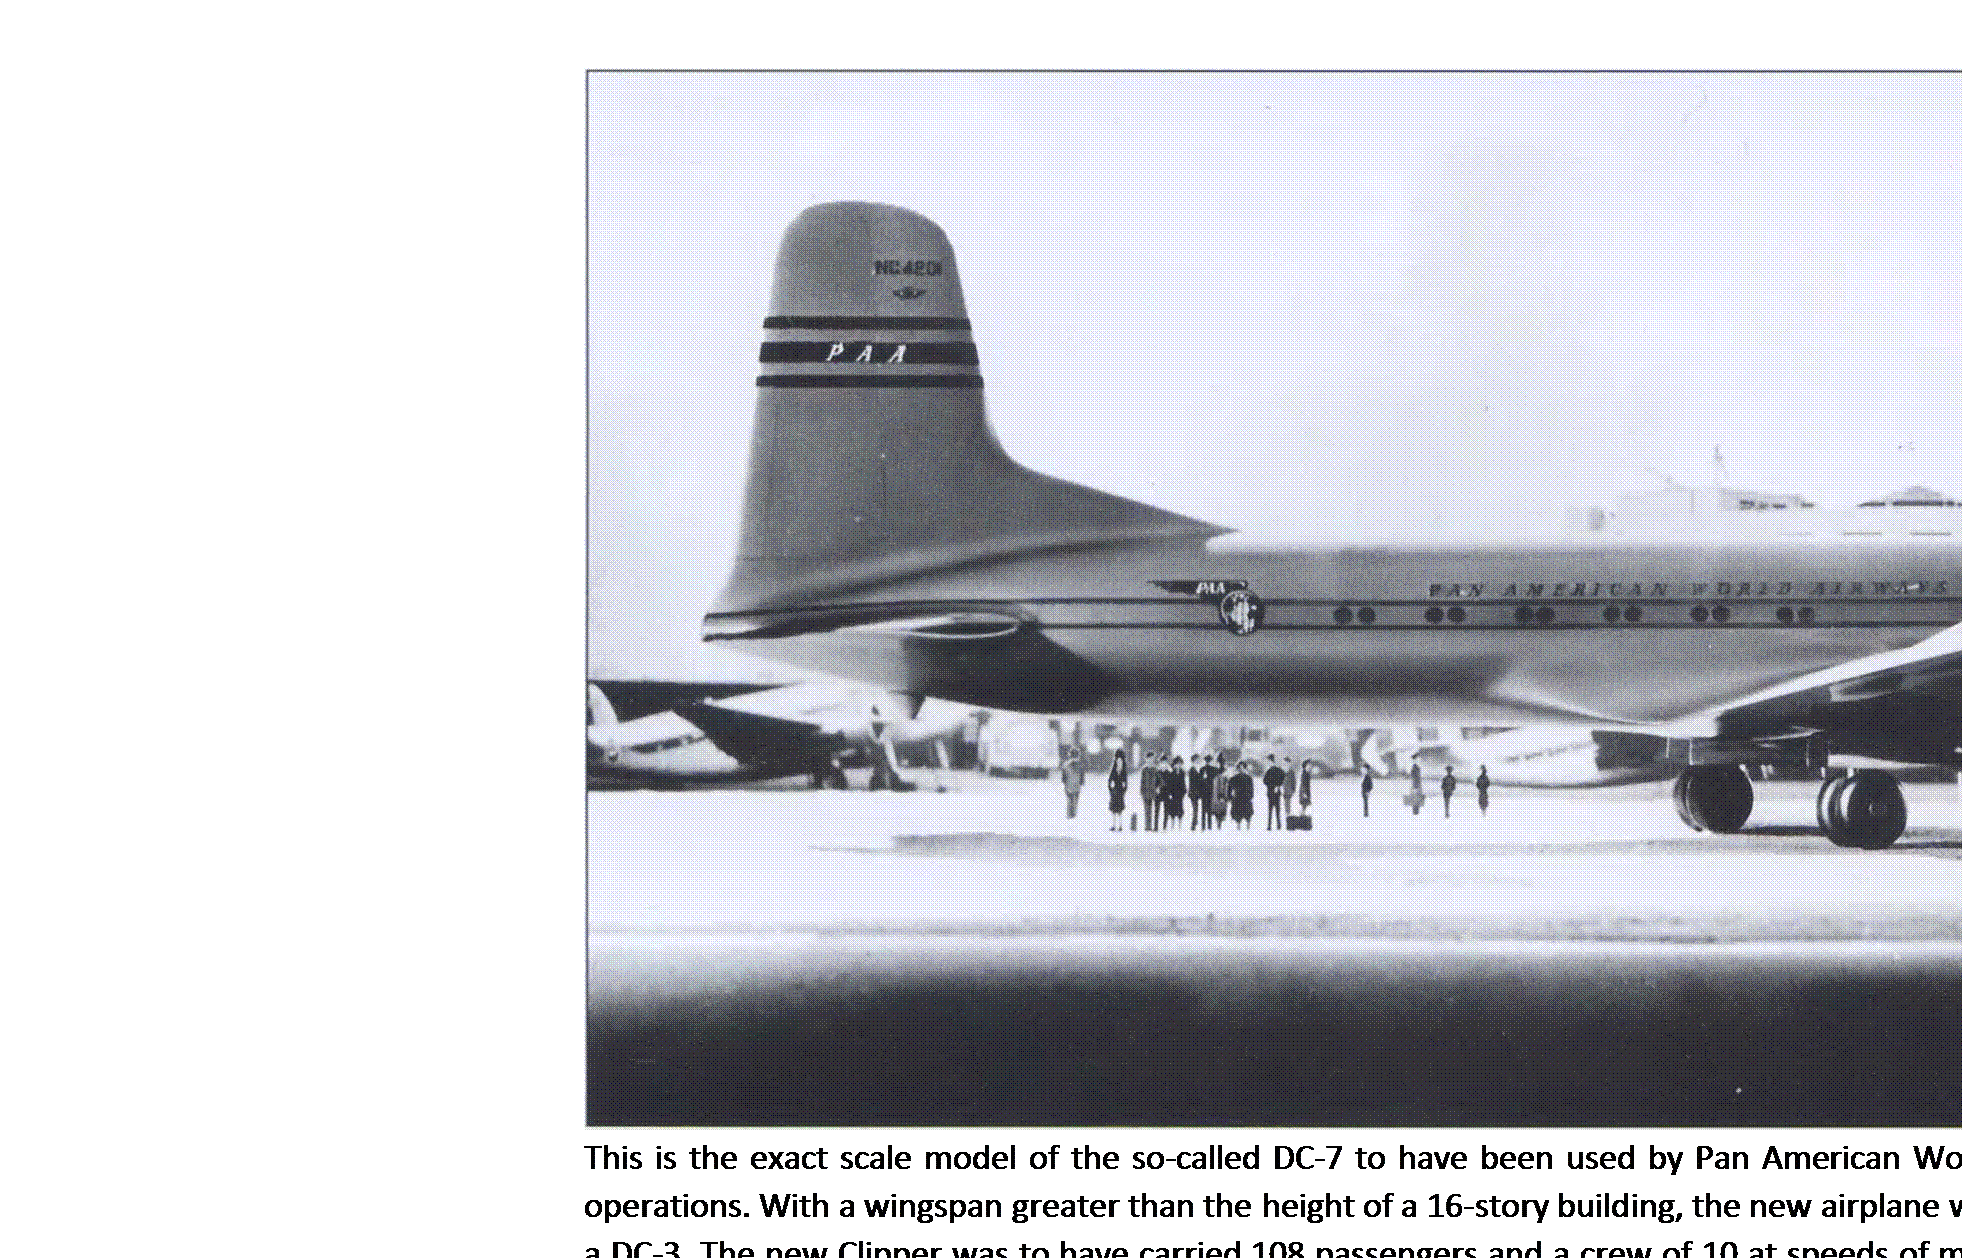 Подпись: This is the exact scale model of the so-called DC-7 to have been used by Pan American World Airways in its postwar transatlantic operations. With a wingspan greater than the height of a 16-story building, the new airplane would have been seven times the size of a DC-3. The new Clipper was to have carried 108 passengers and a crew of 10 at speeds of more than 300 mph, offering lower seat-mile costs than ever before. (Craig Kodera Collection) 